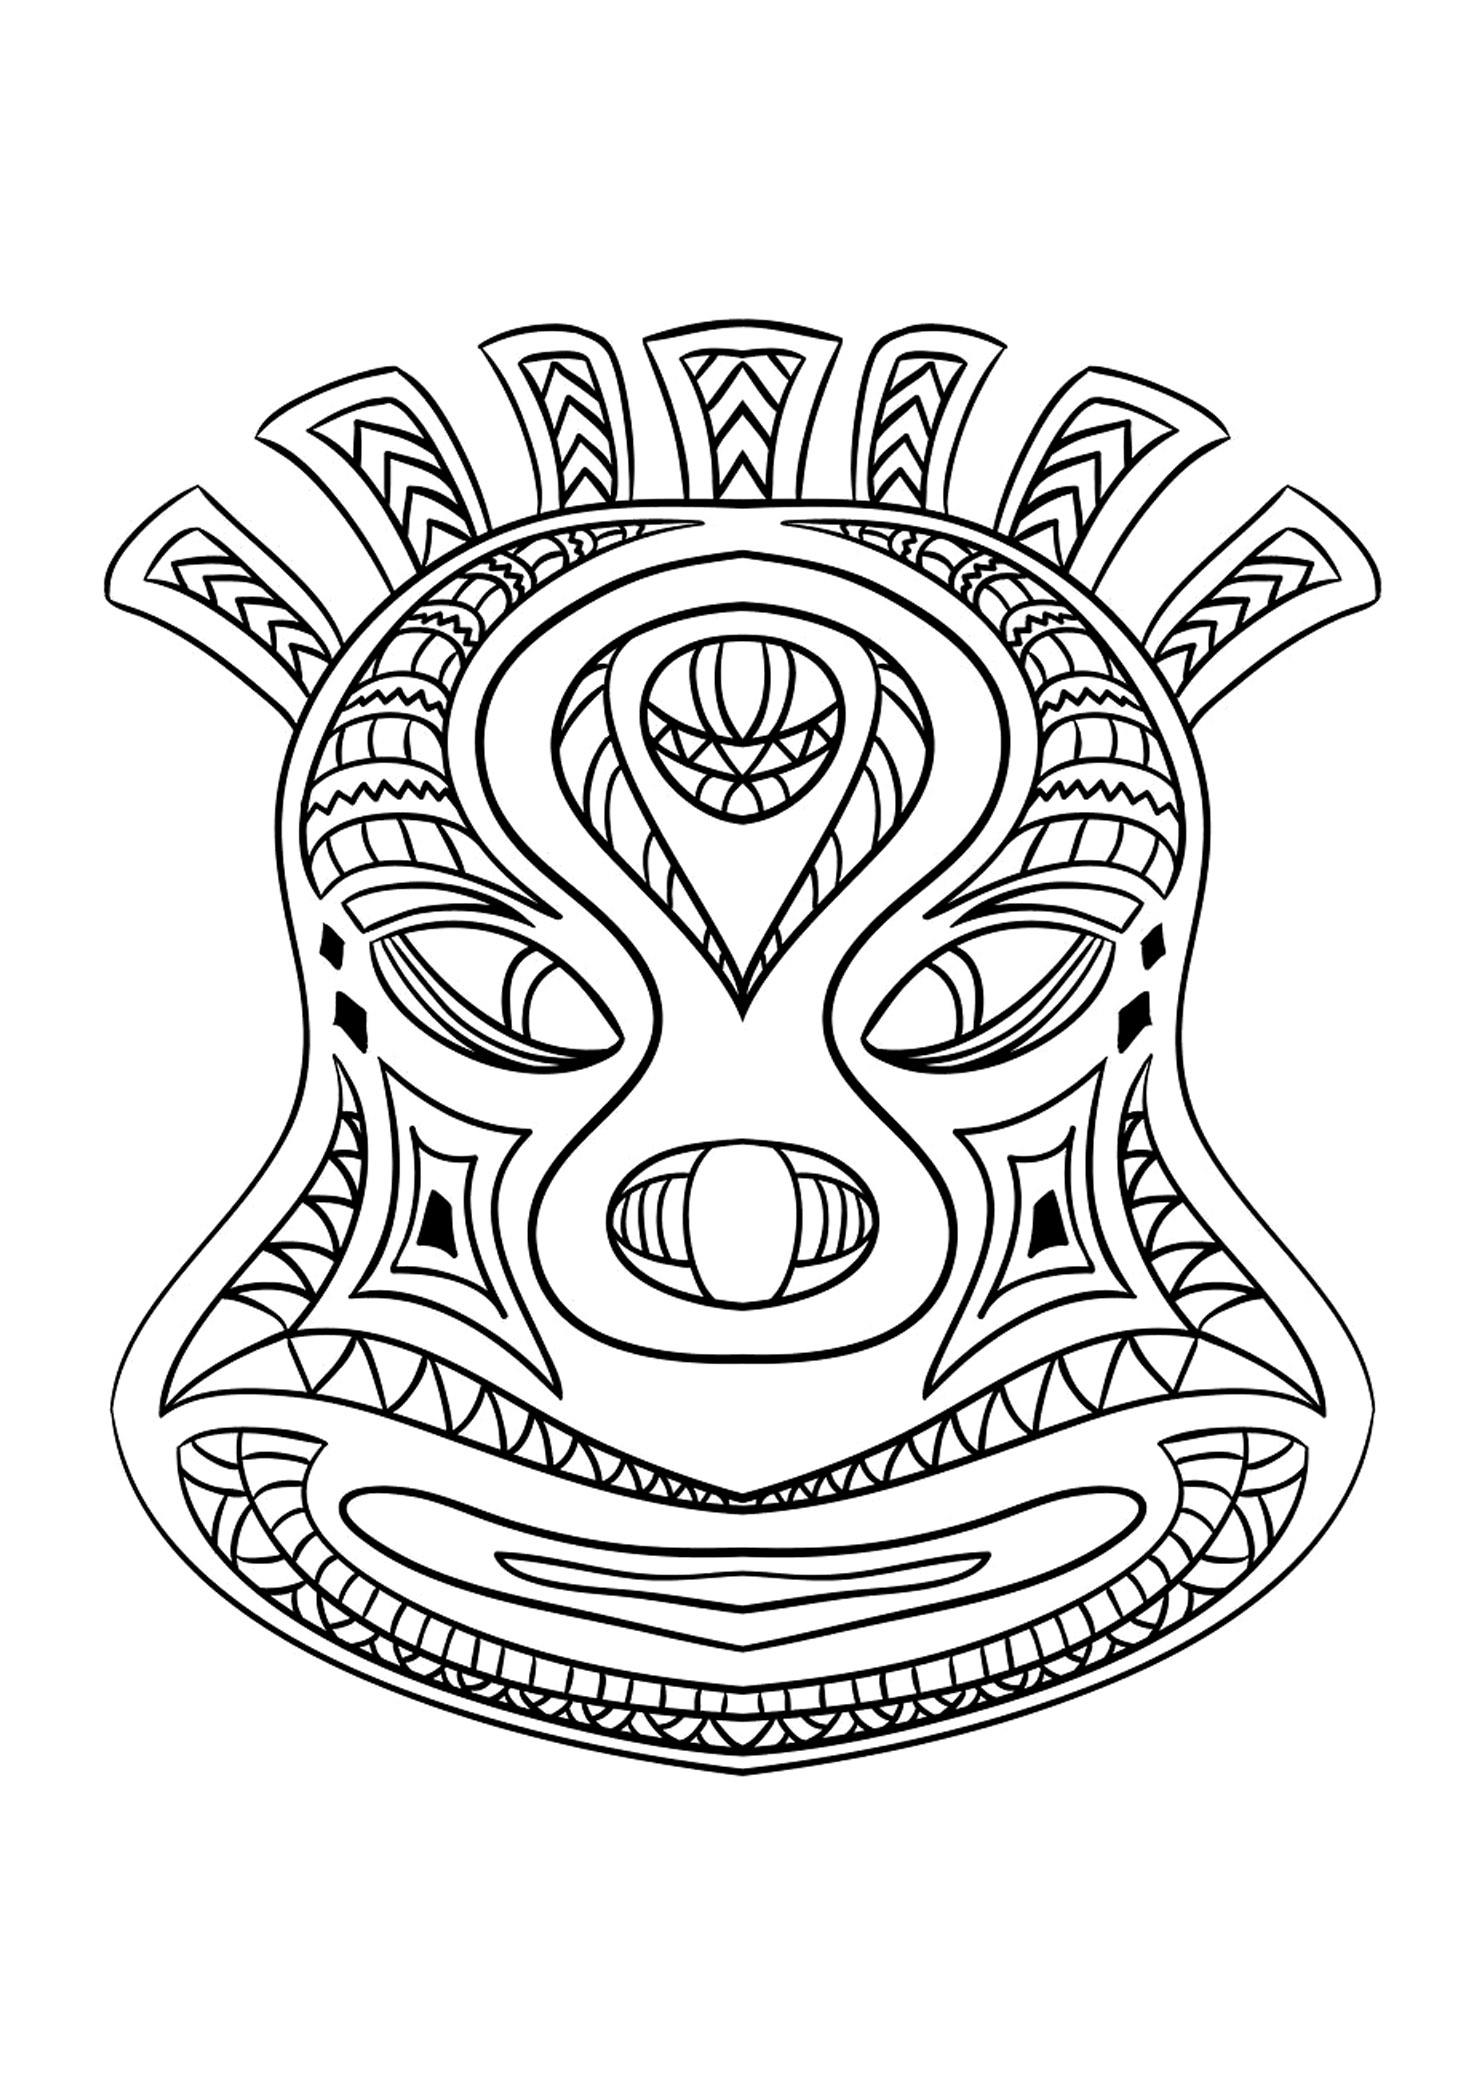 Masks coloring page to download